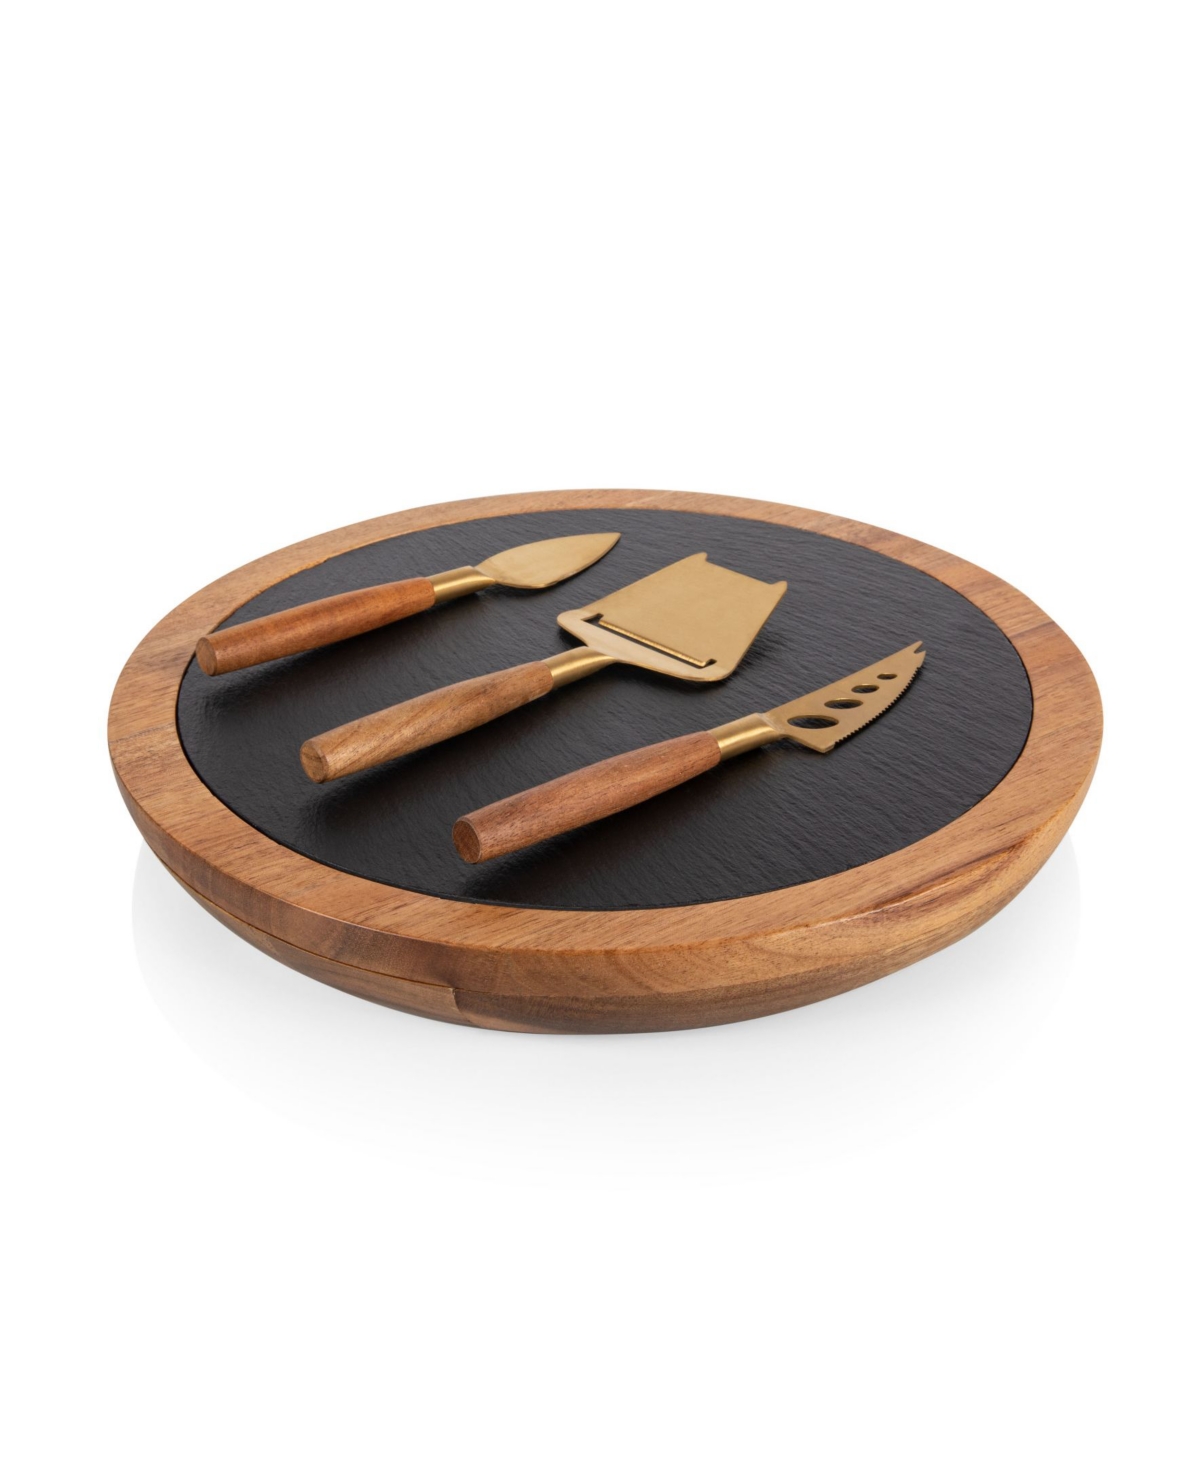 TOSCANA INSIGNIA SERVING BOARD WITH CHEESE TOOLS